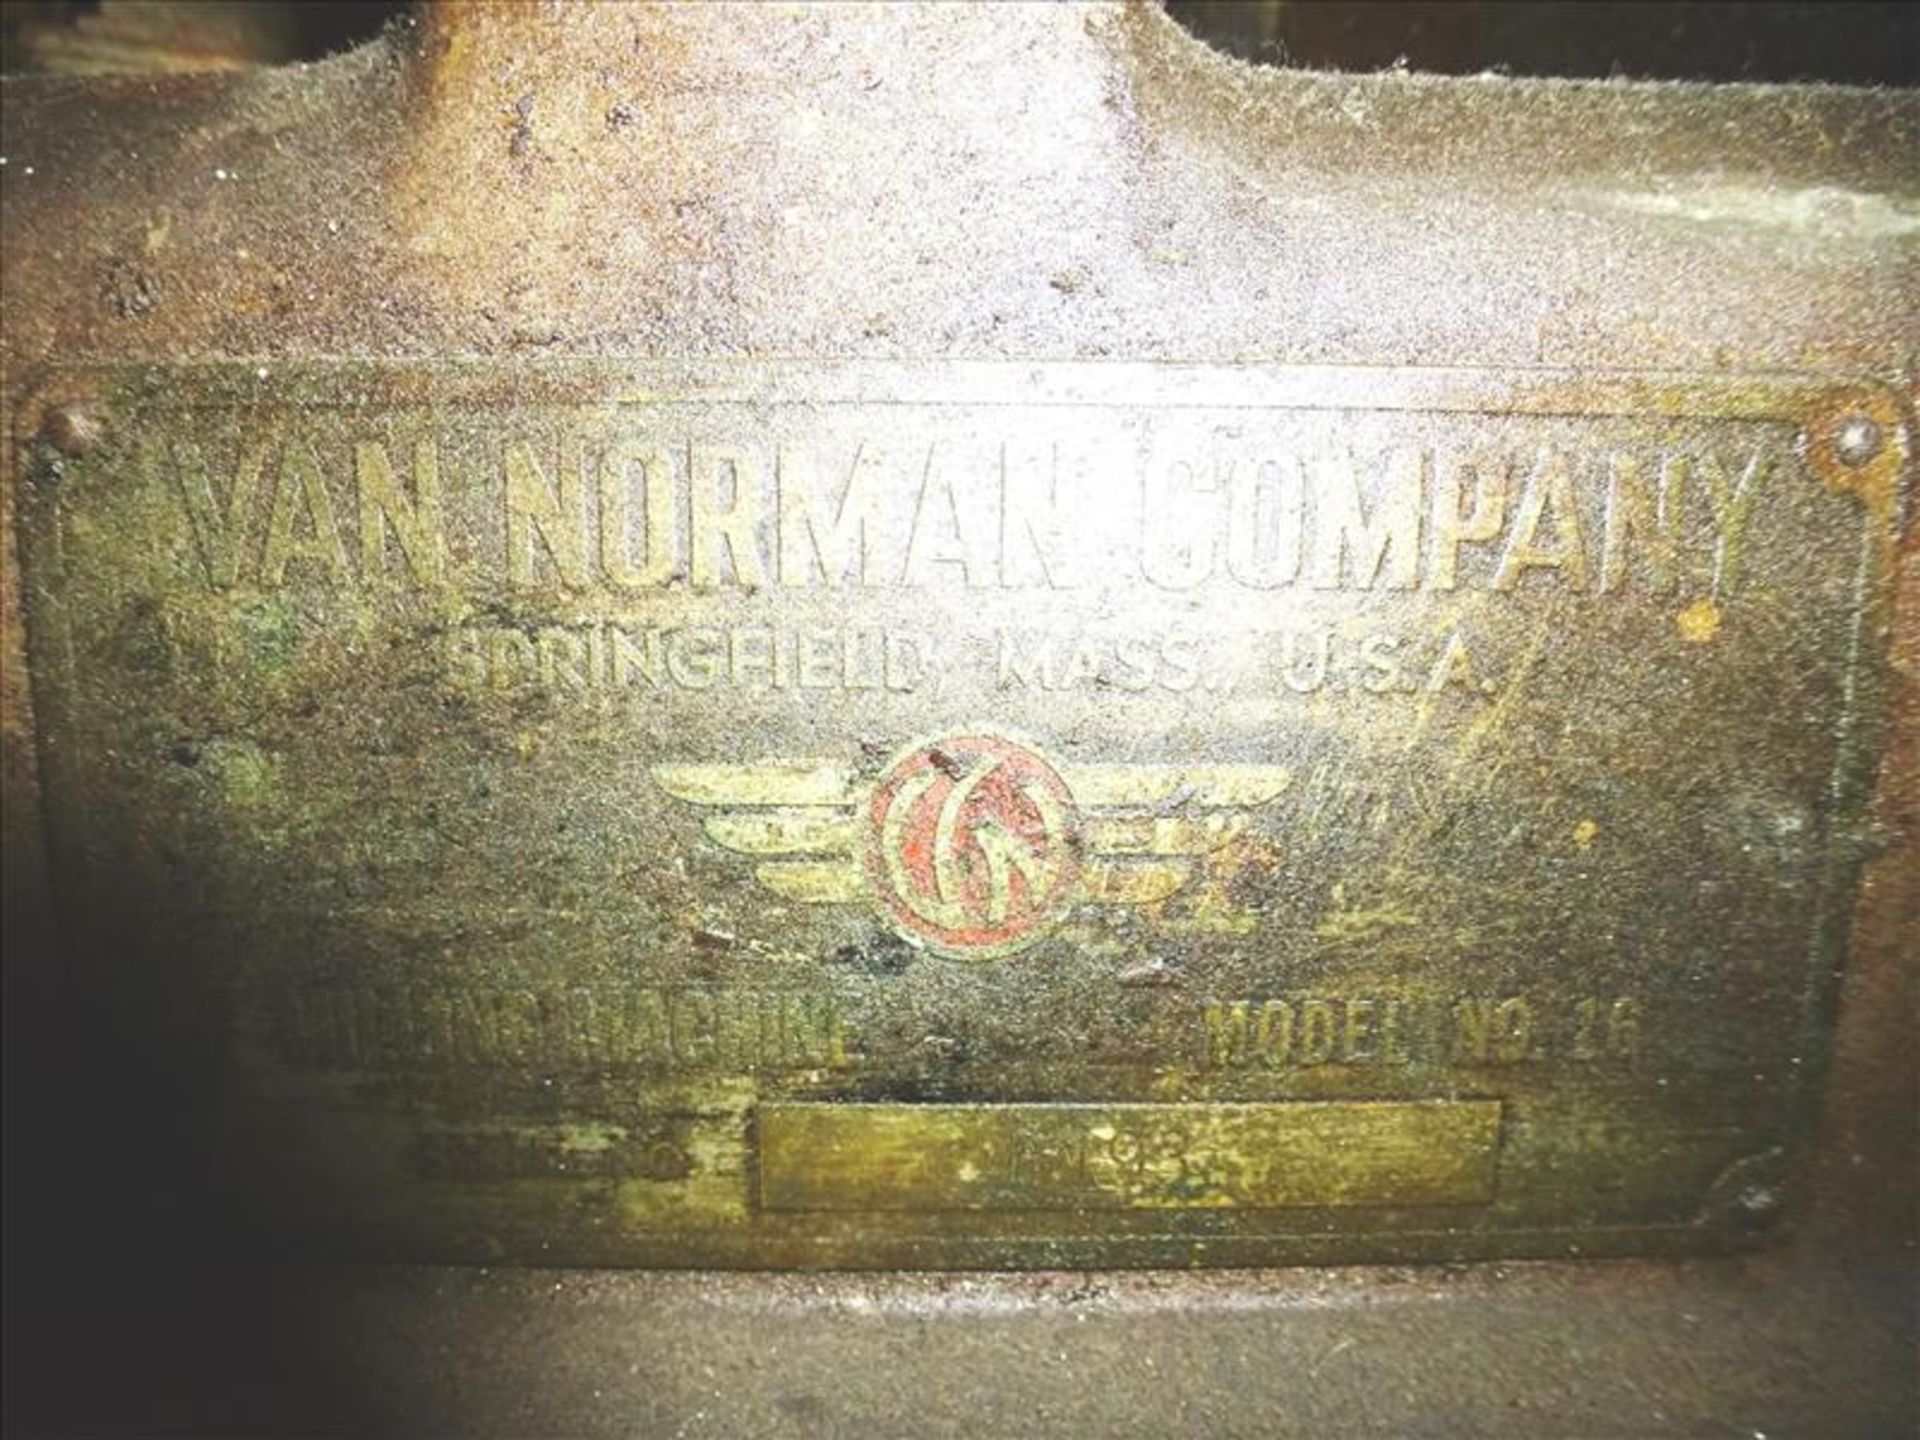 Van Norman universal milling machine c/w vise model 16 (located at 150 Bartor Rd Toronto ON Canada) - Image 2 of 2